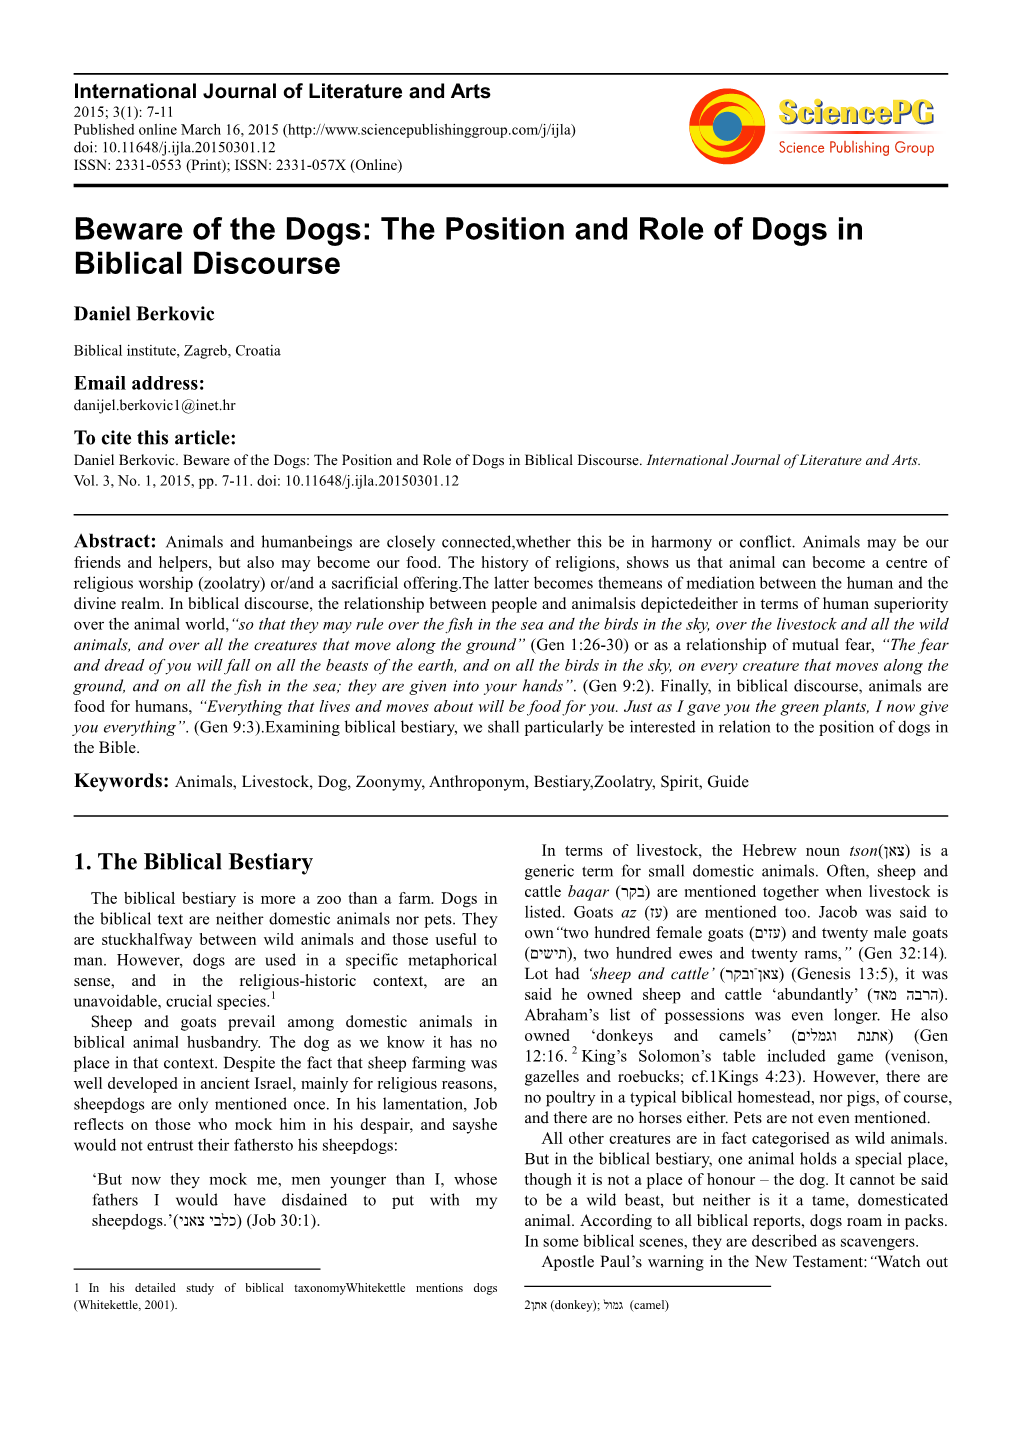 Beware of the Dogs: the Position and Role of Dogs in Biblical Discourse